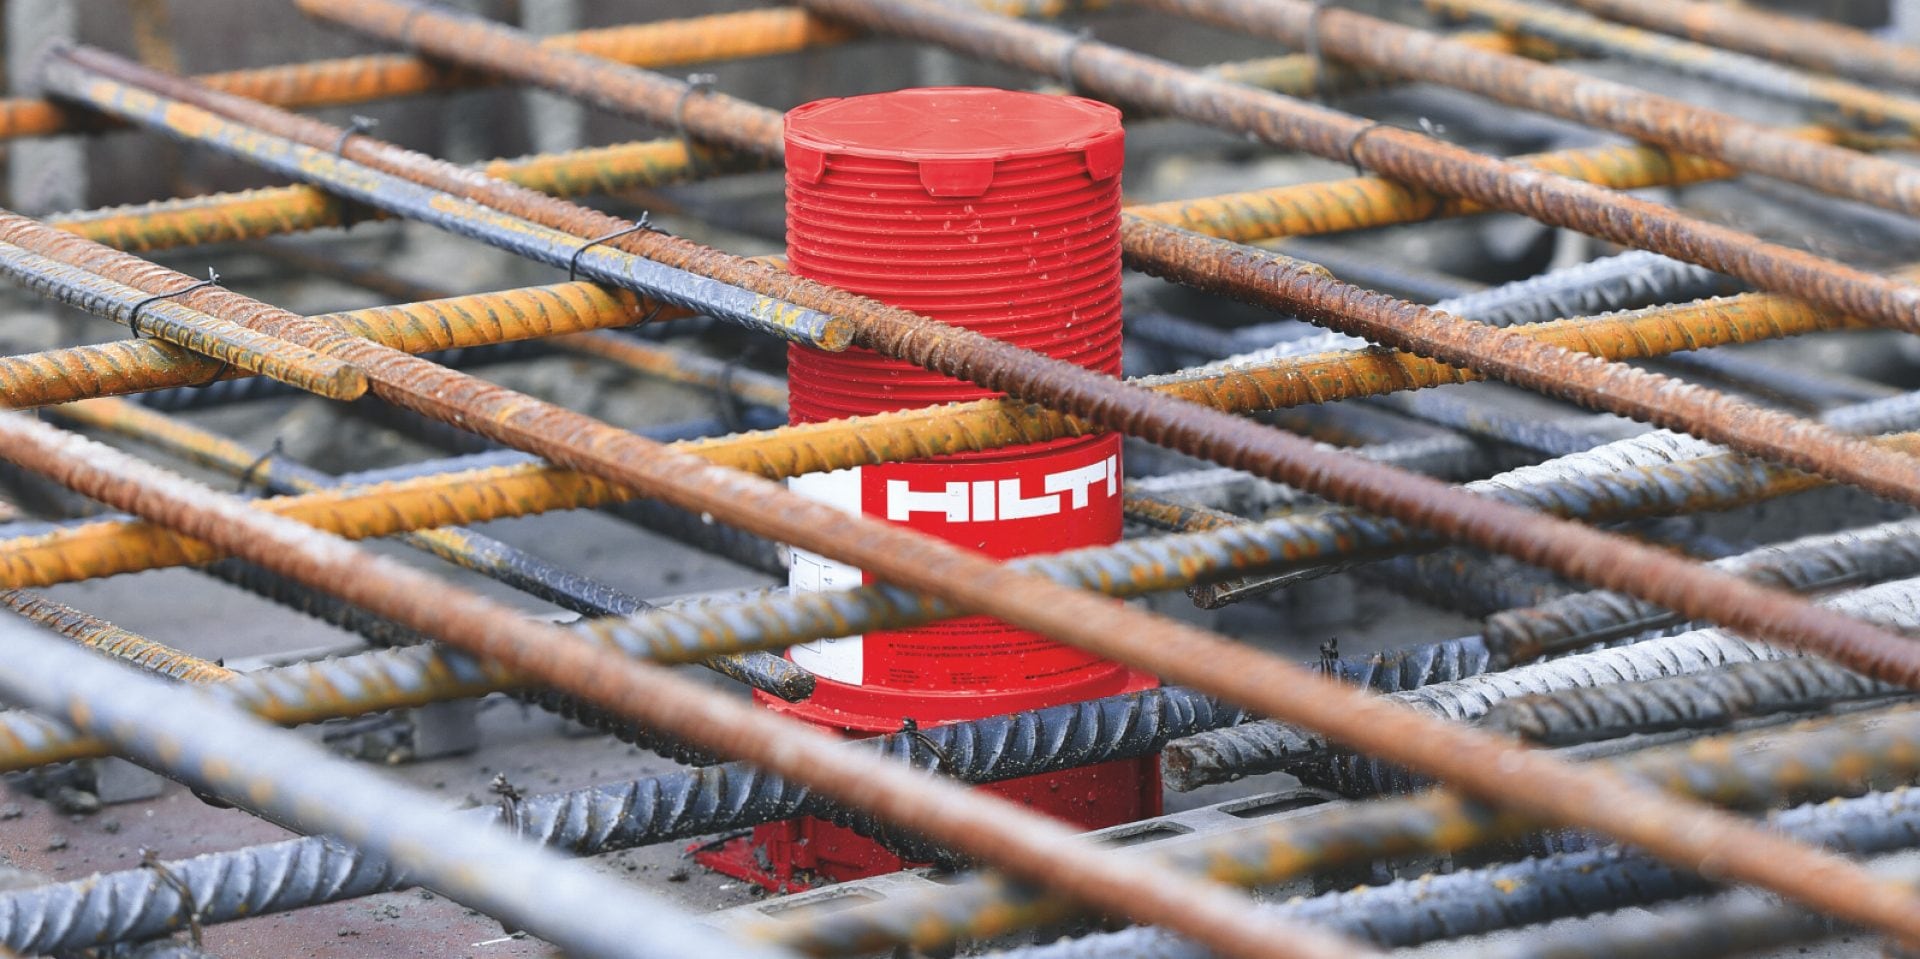 Hilti firestop cast-in sleeves for cables and pipes being placed on concrete slabs after laying them out in BIM